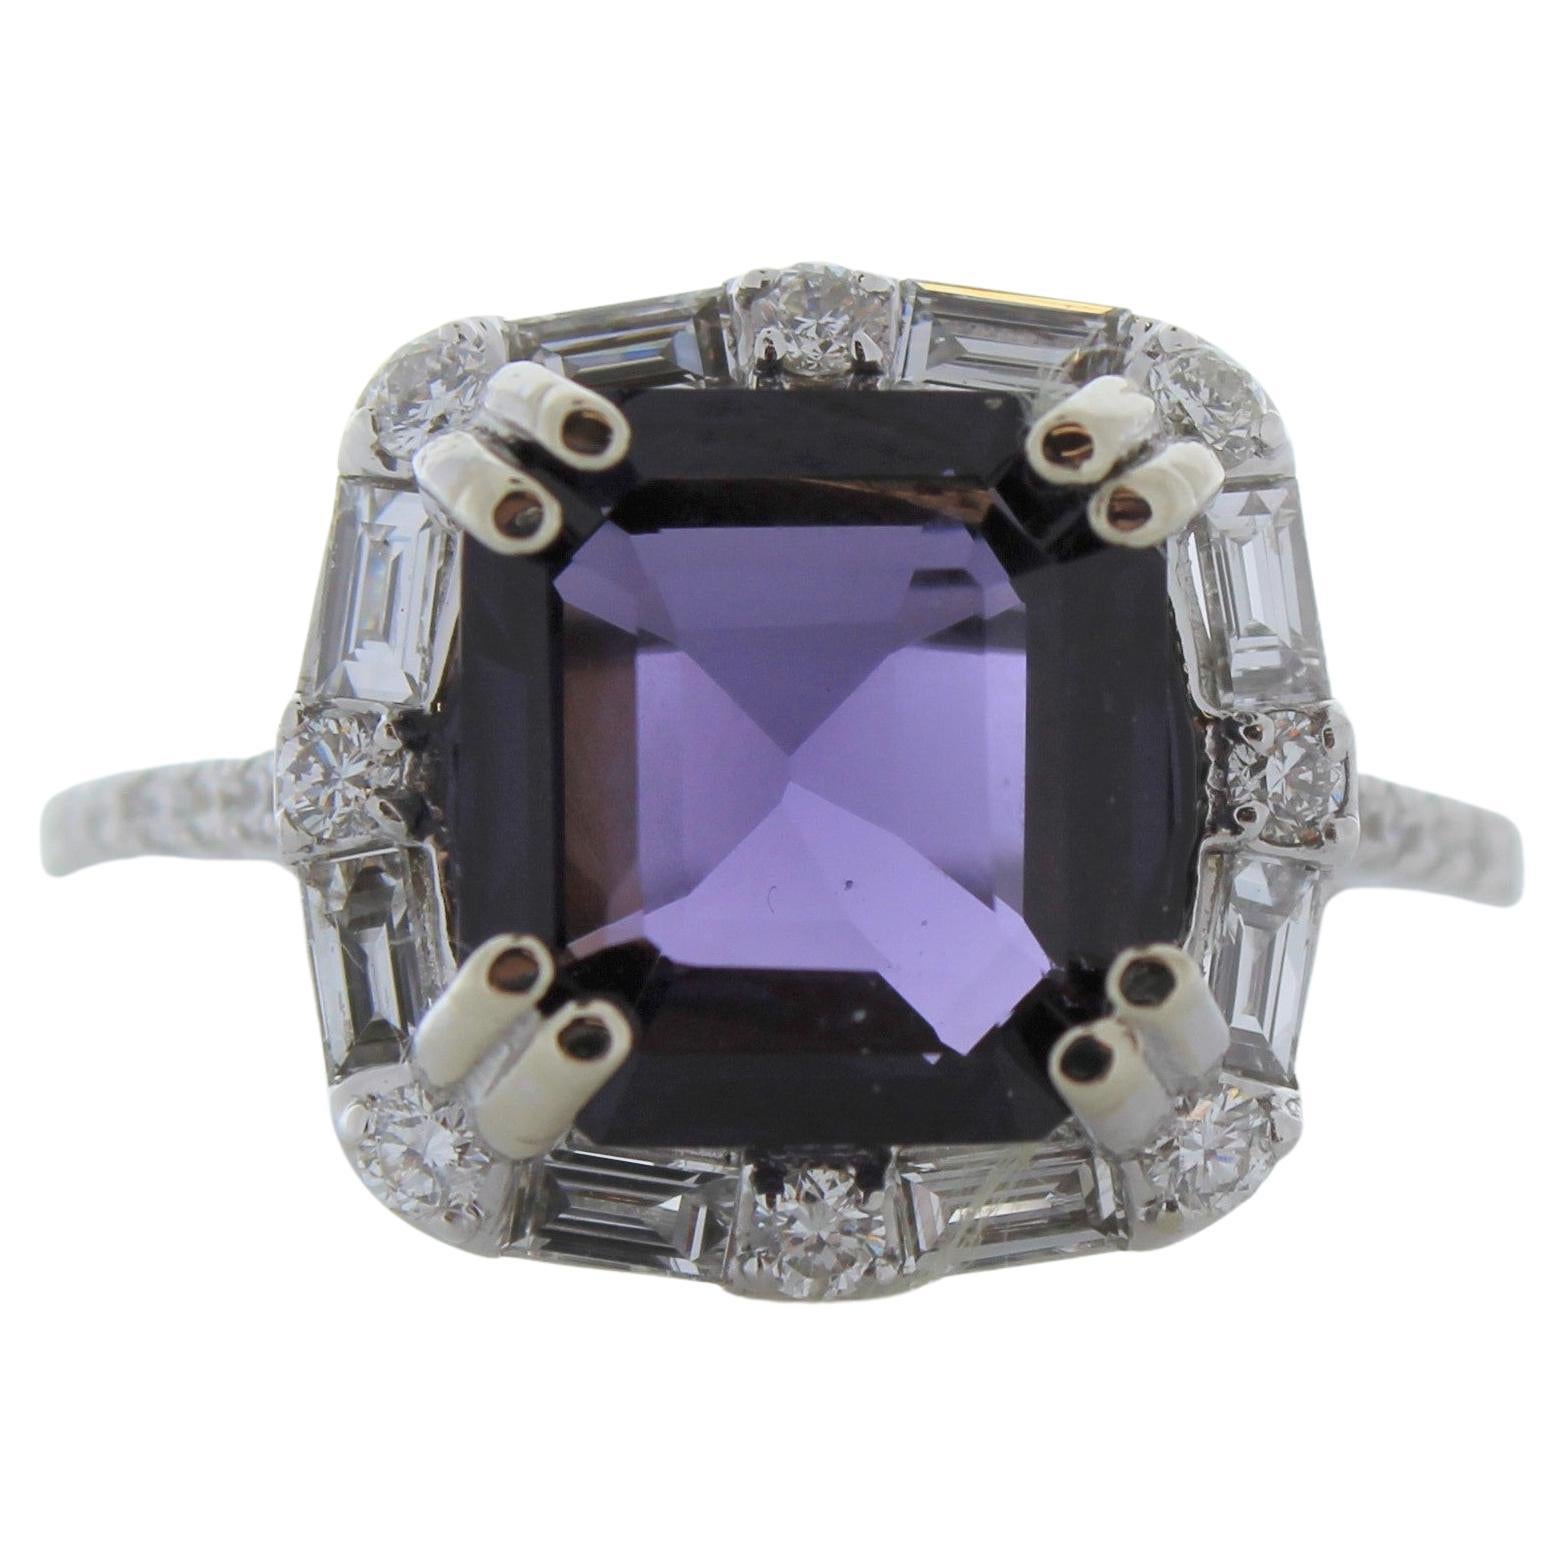 4.45 Carat Cushion Purple Spinel and Diamond Ring in 14K White Gold For Sale